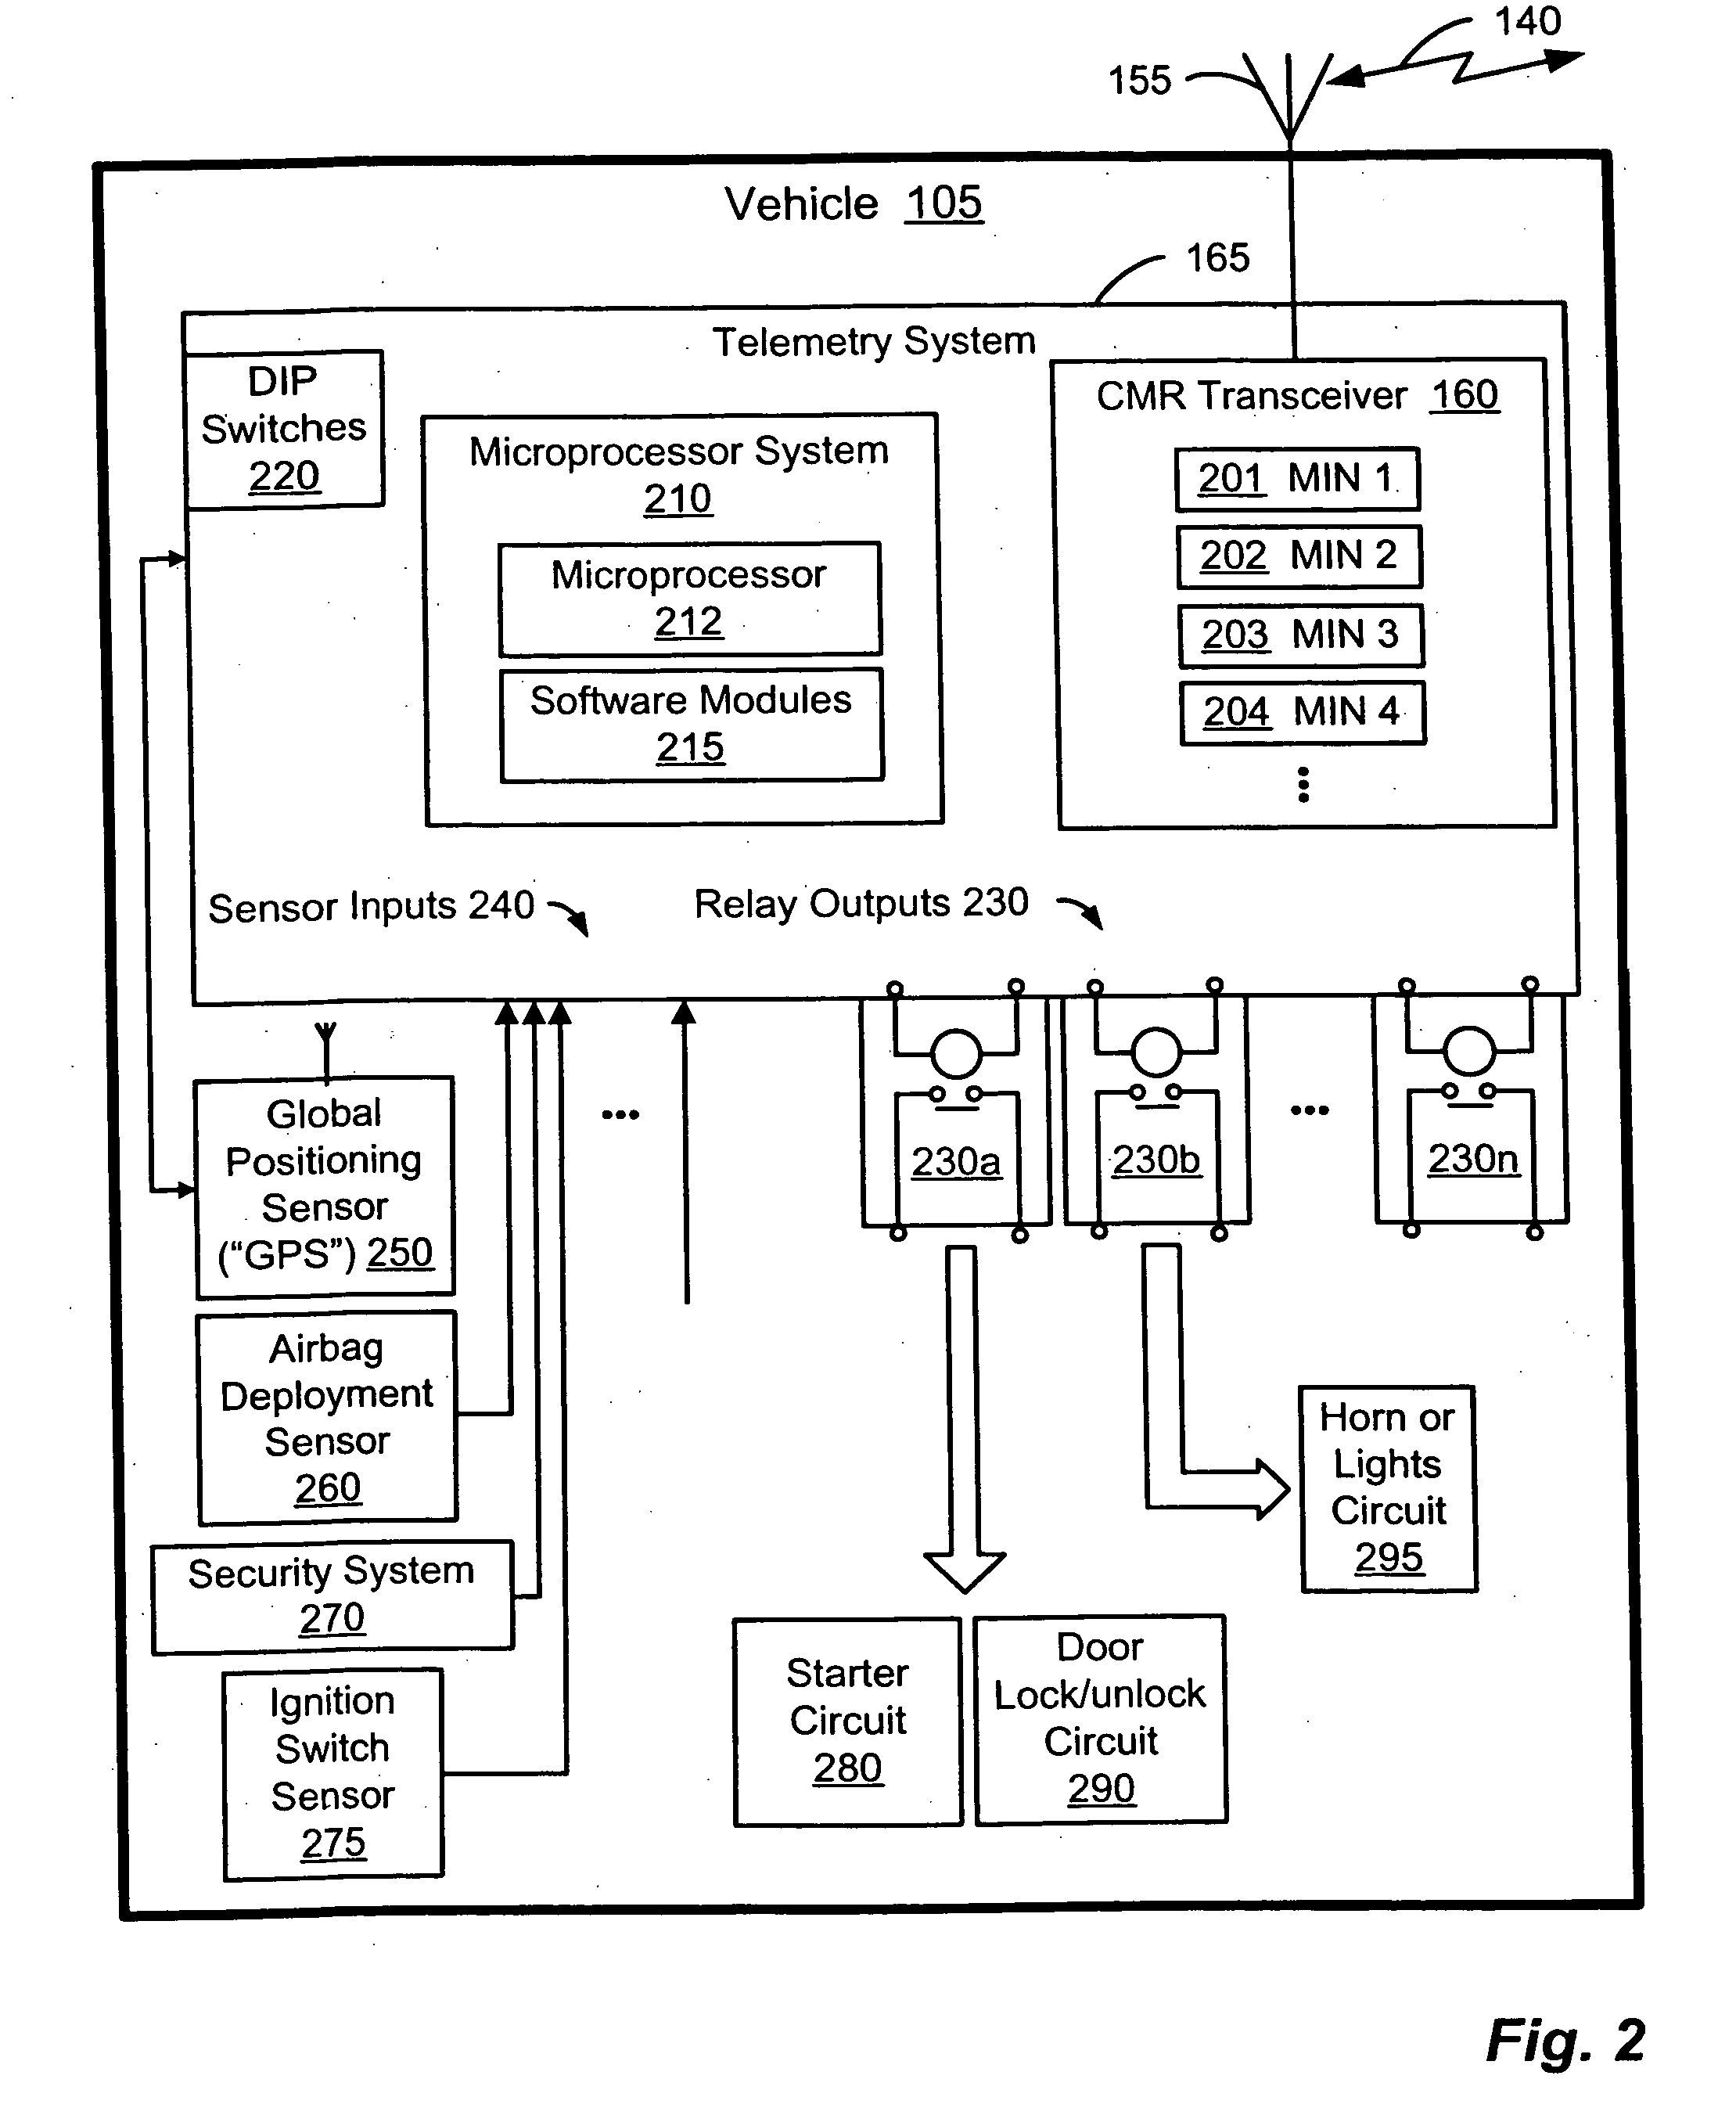 Method and system for remotely monitoring the operations of a vehicle